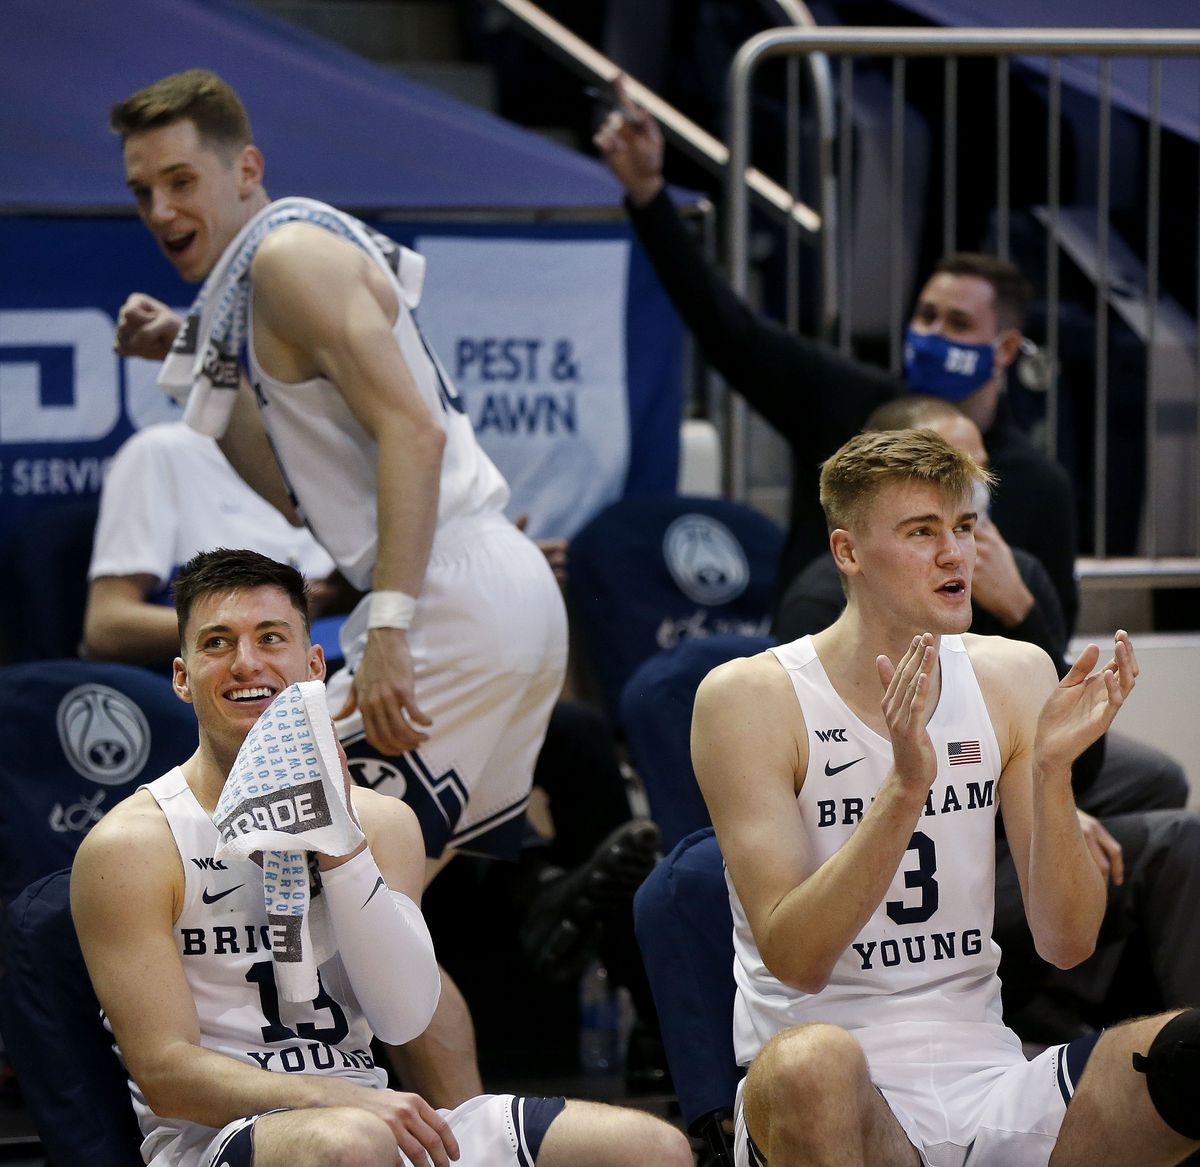 Brigham Young Cougars guard Alex Barcello (13) and Matt Haarms (3) make jokes from the bench as their teammates play against Portland at the Marriott Center in Provo on Thursday, Jan. 21, 2021.